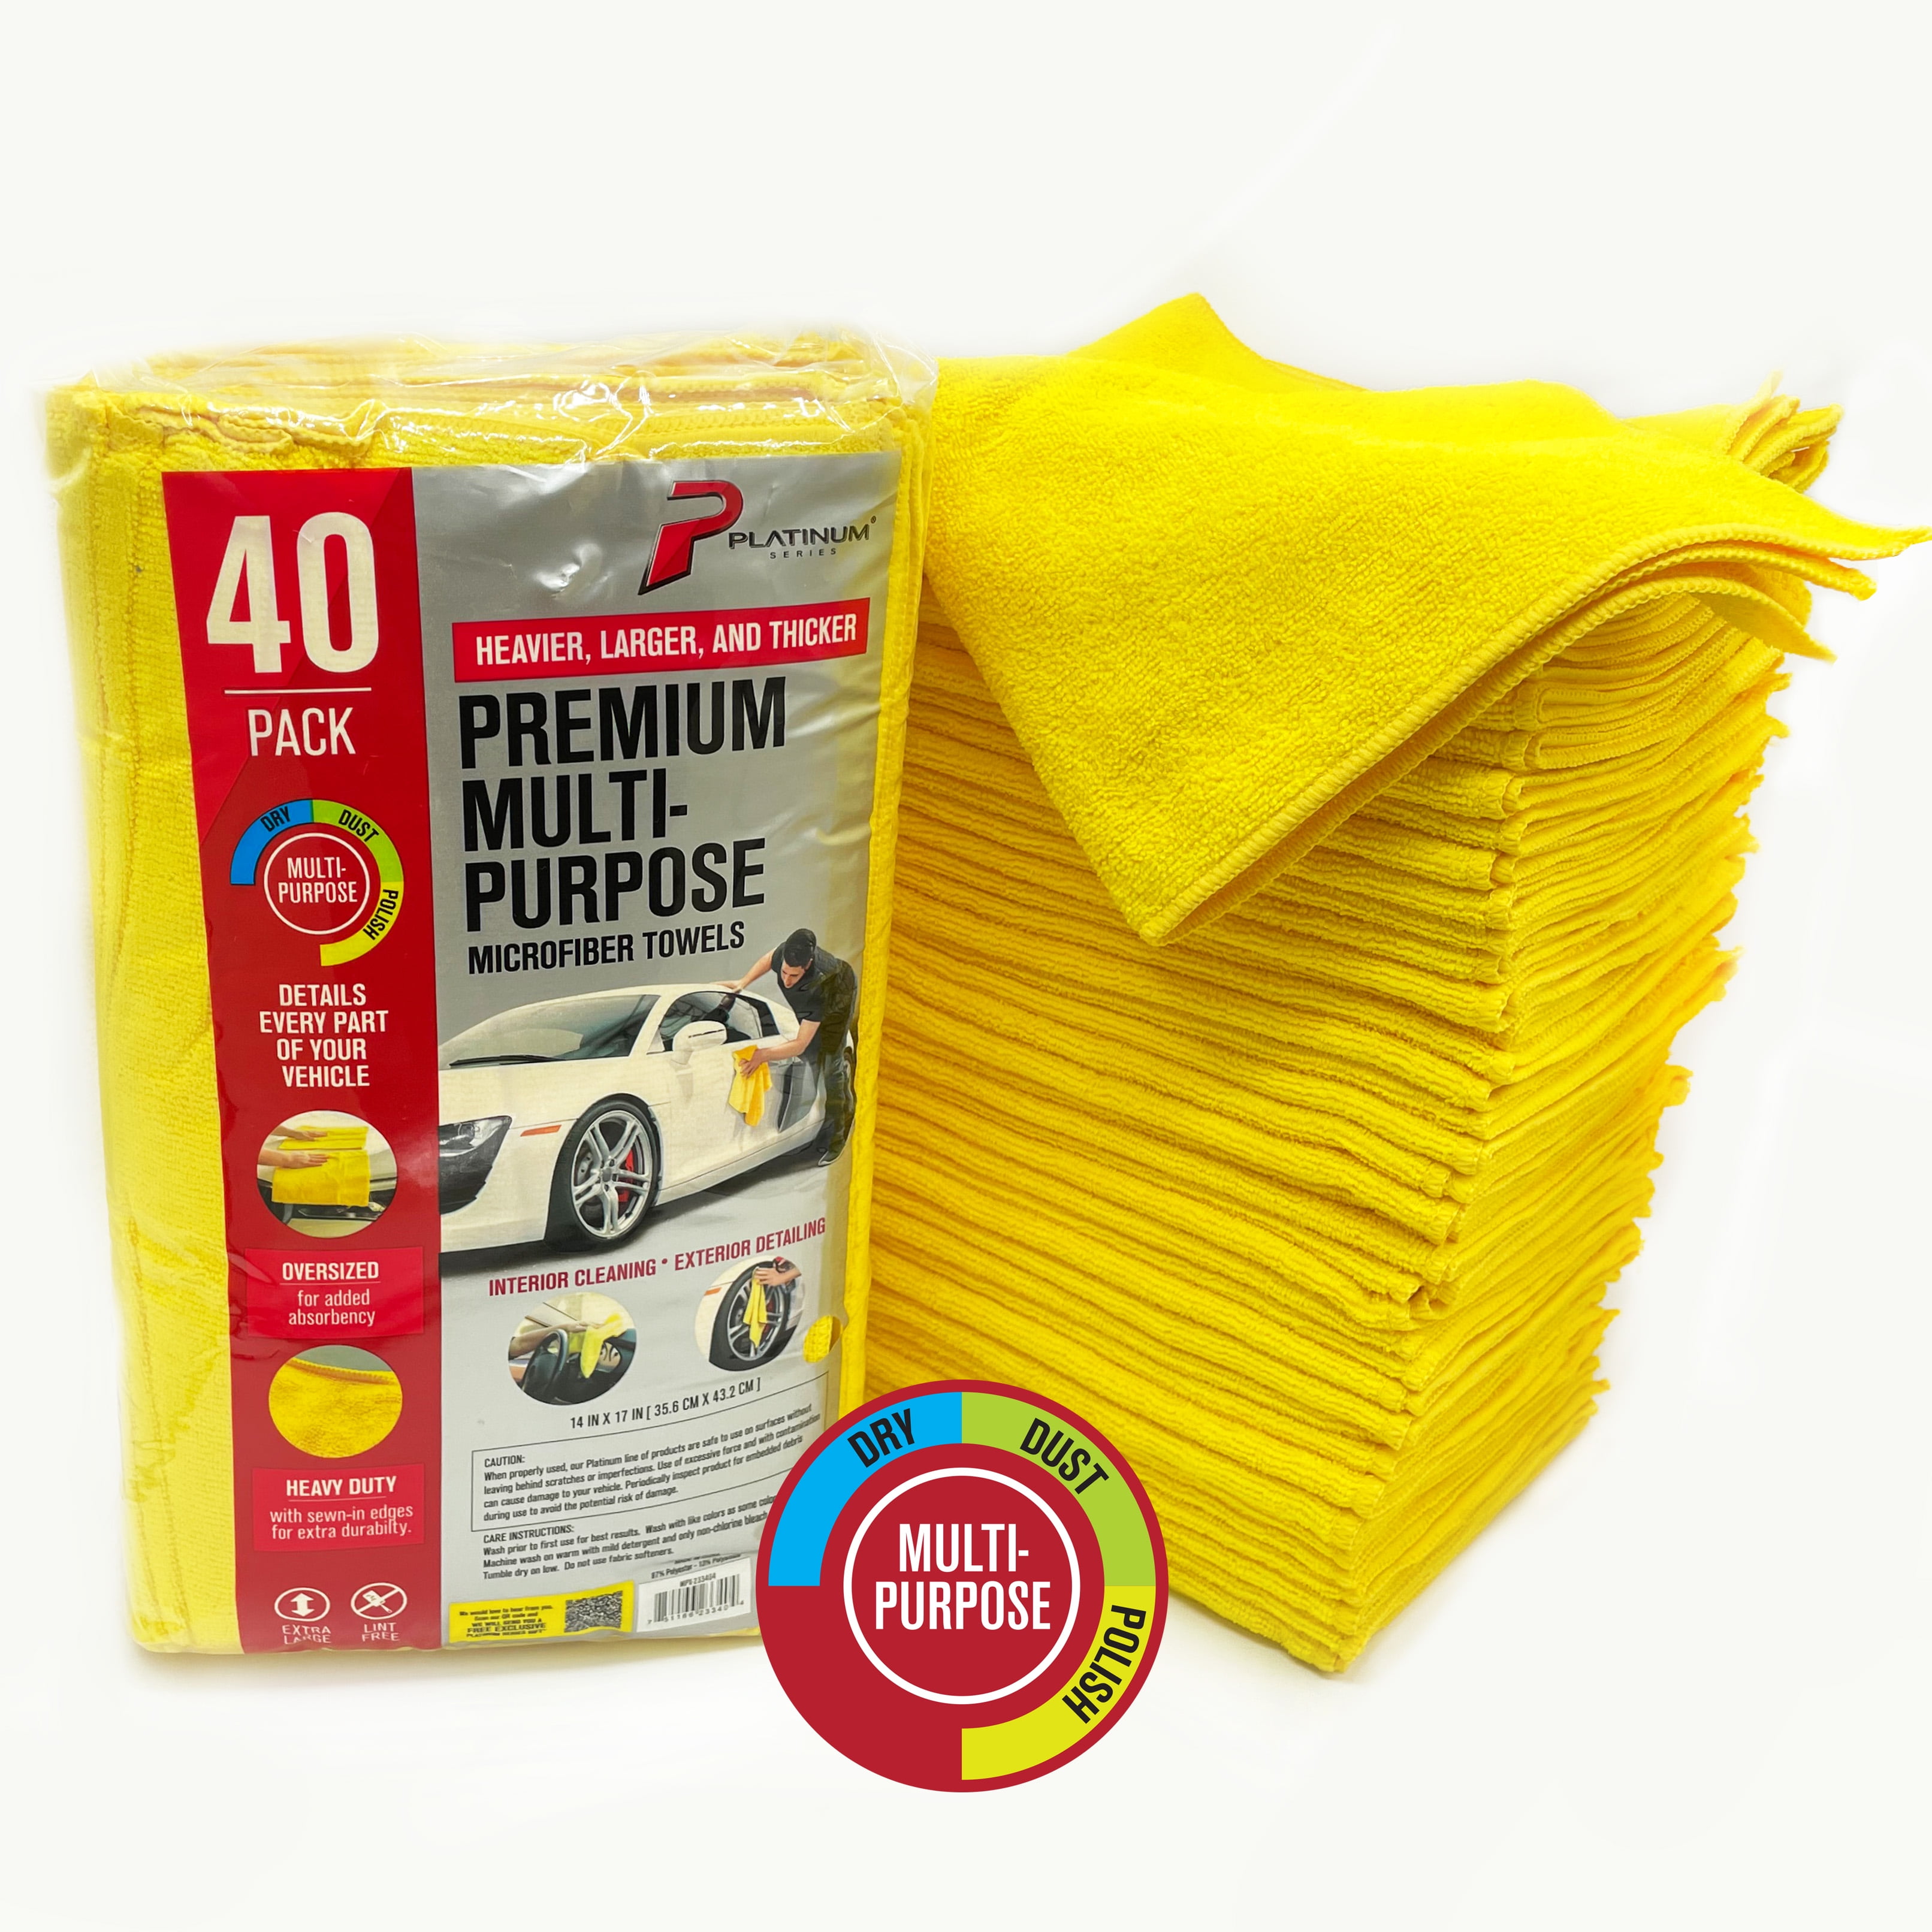 40x40cm Microfibre Cleaning Cloths 40 Pack Multi-purpose use on any surface 